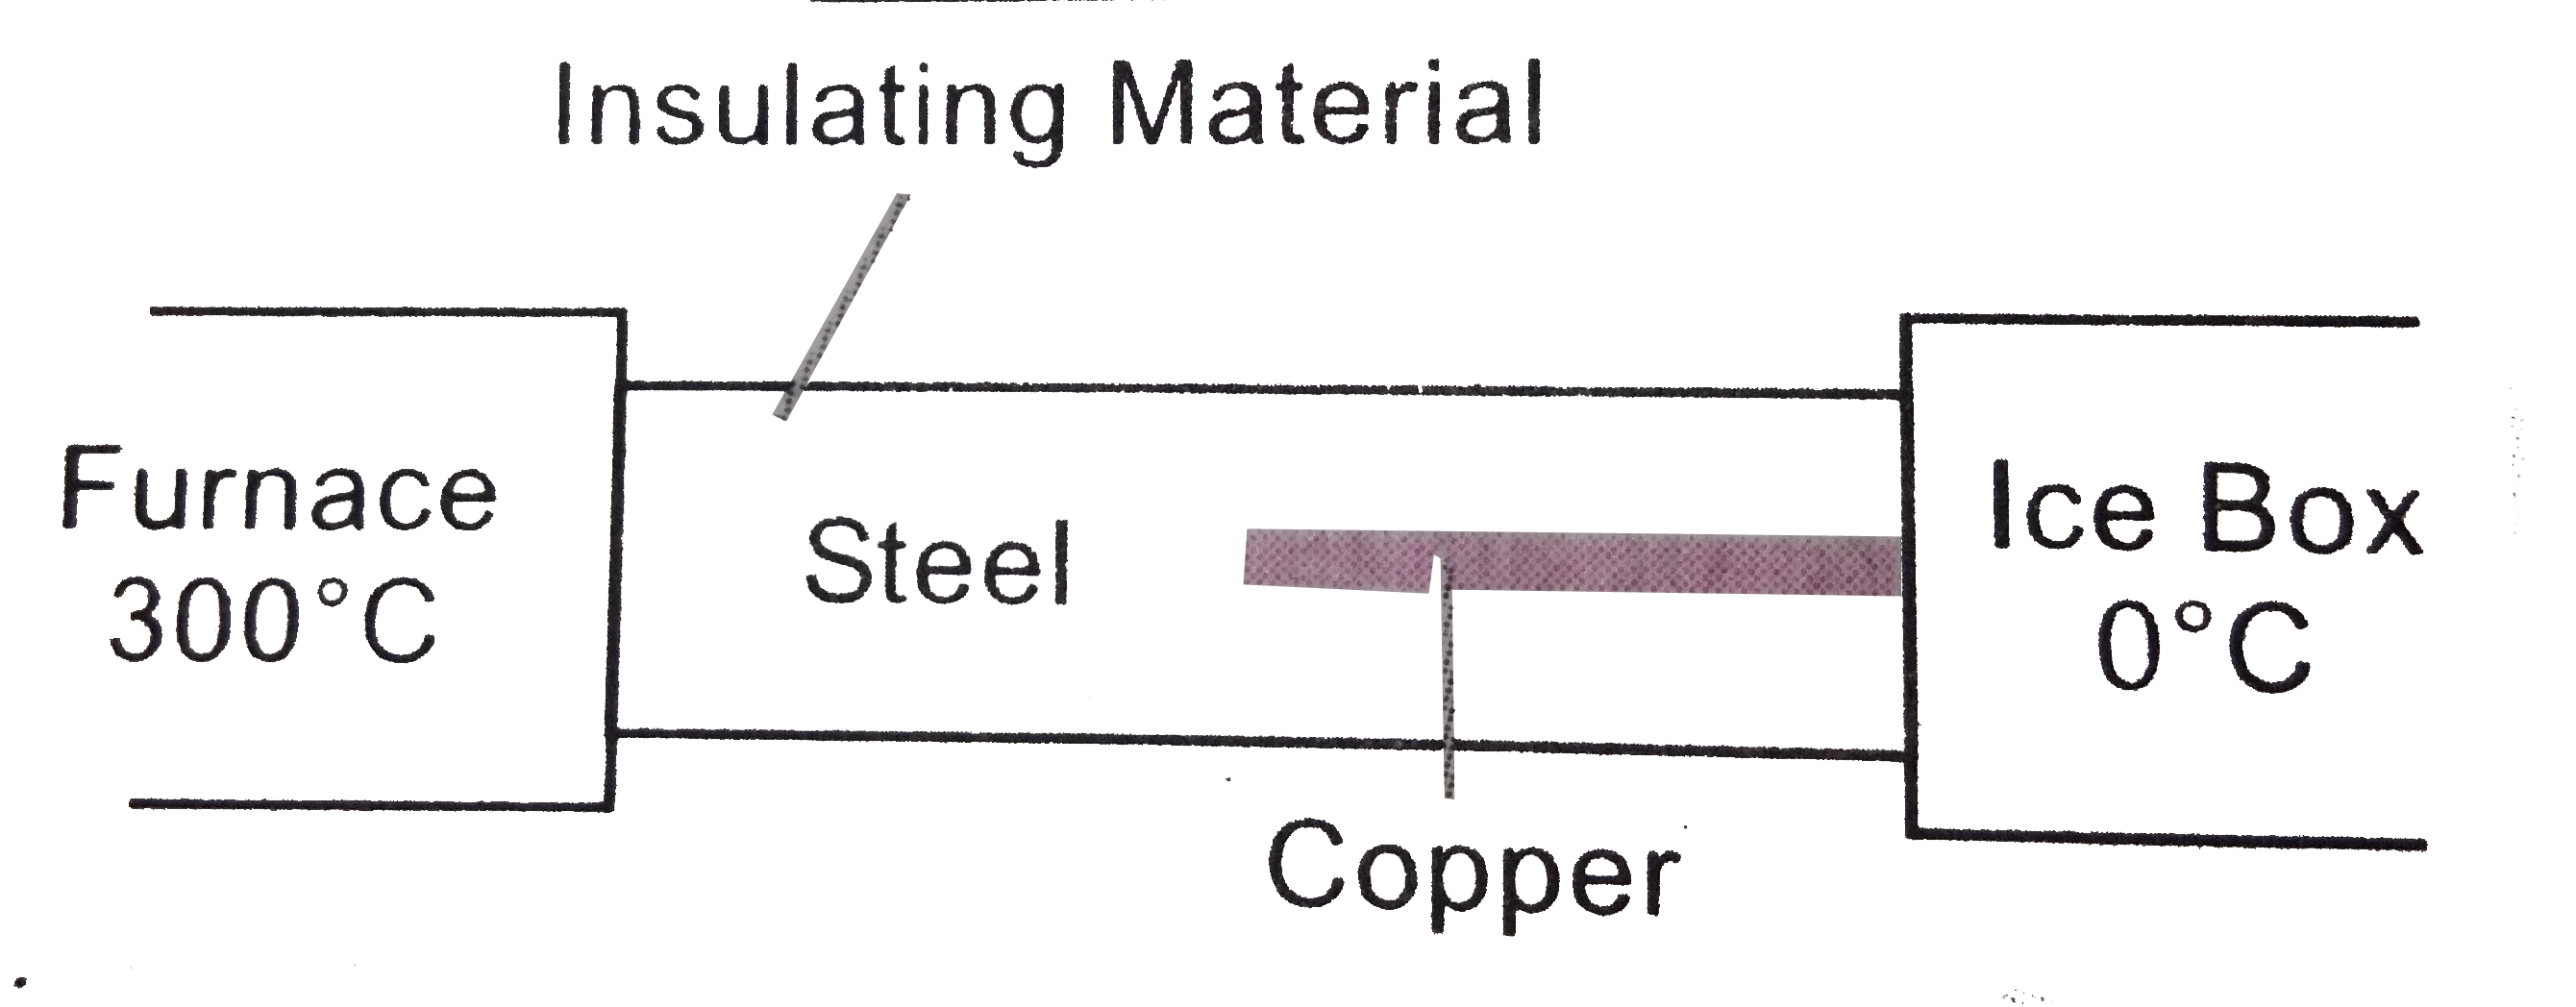 What is the temperature of the steel-copper junction in the steady state system show in Fig. 7(e).17? Length of steel rod = 15.0 cm, length of the copper rod = 10.0 cm, temperature of the furnace =300^(@)C, temperature of other end 0^(@)C. The are of cross-section of the steel rod is twice that of the copper rod. (Thermal conductivity of steel =50.2 js^(-1) m^(-1) K^(-1) and of copper =3895 js^(-1) m^(-1) K^(-1)).